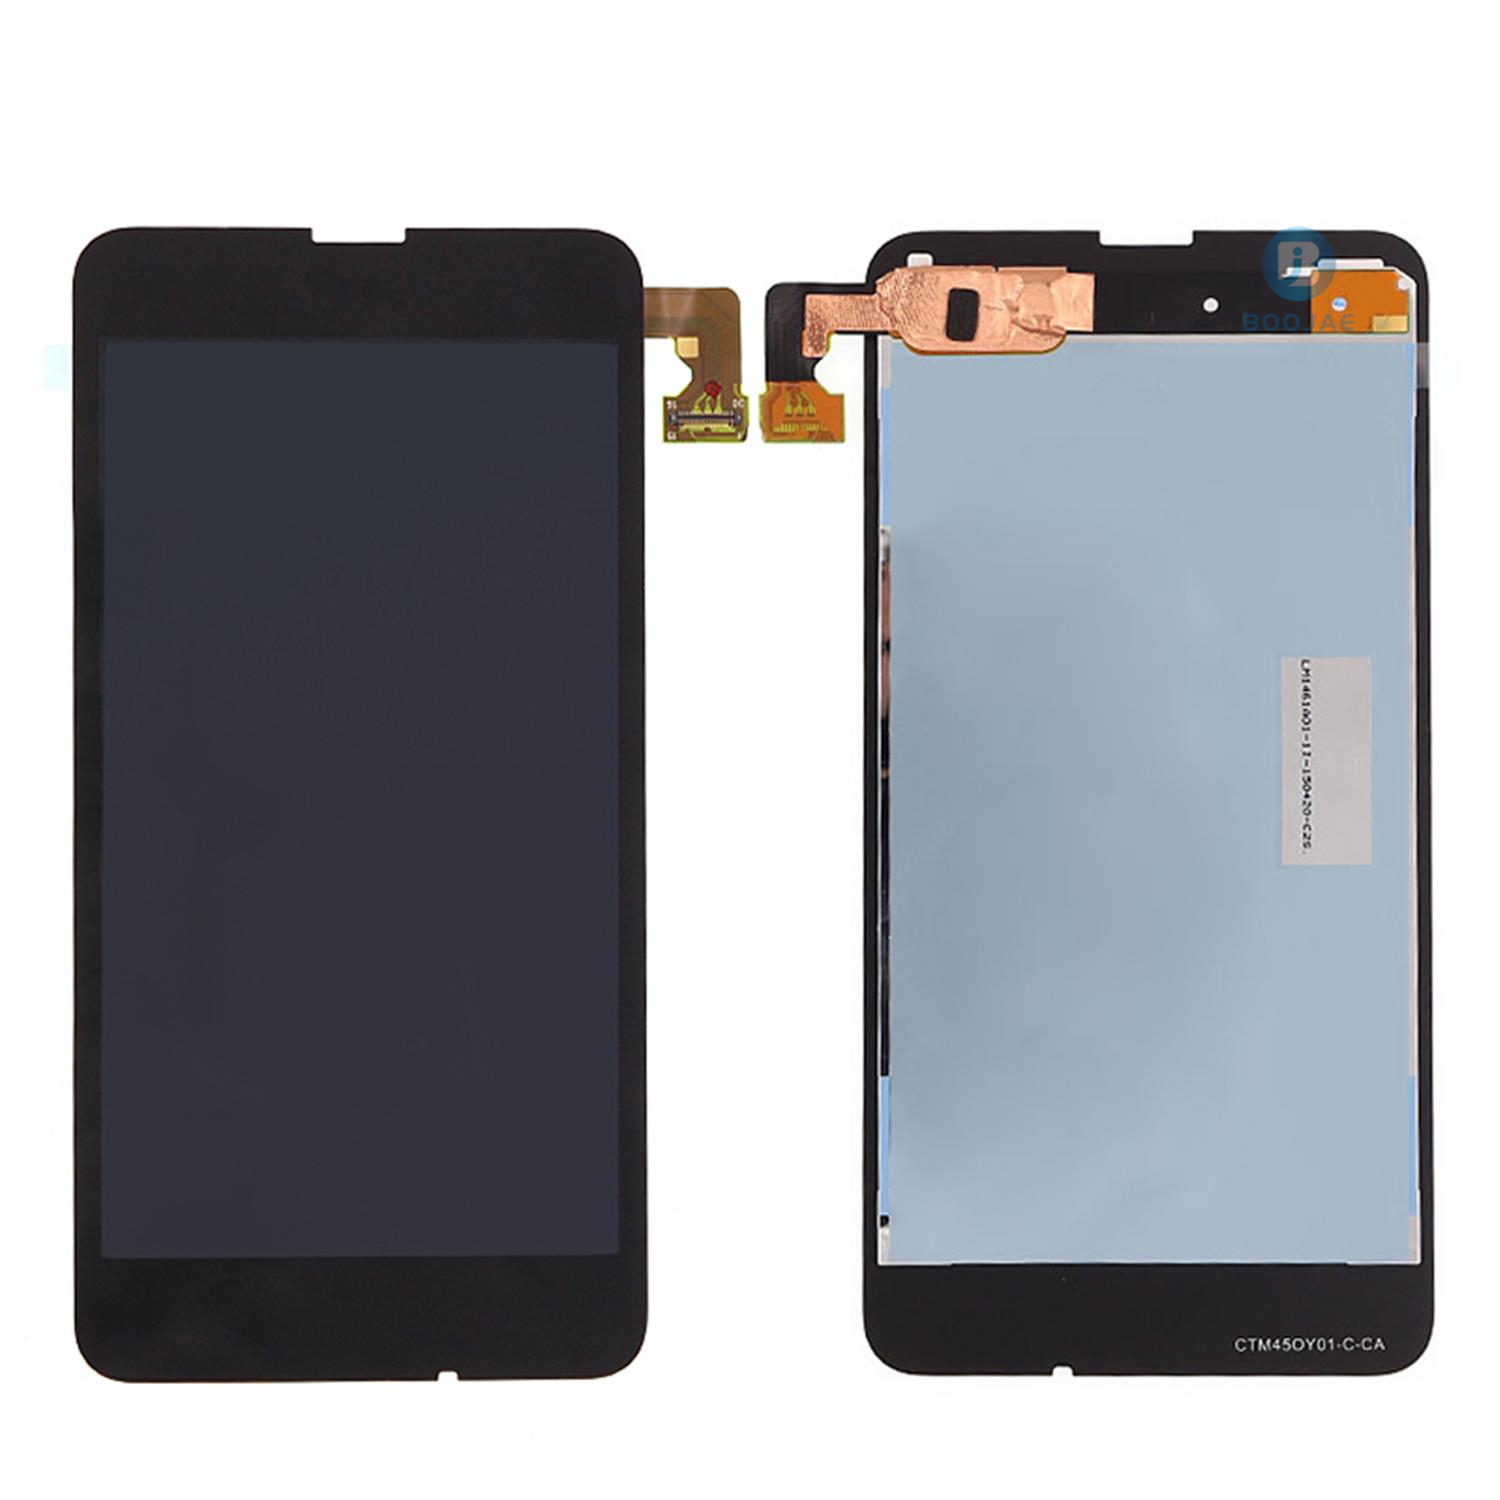 For Nokia Lumia 630 LCD Screen Display and Touch Panel Digitizer Assembly Replacement